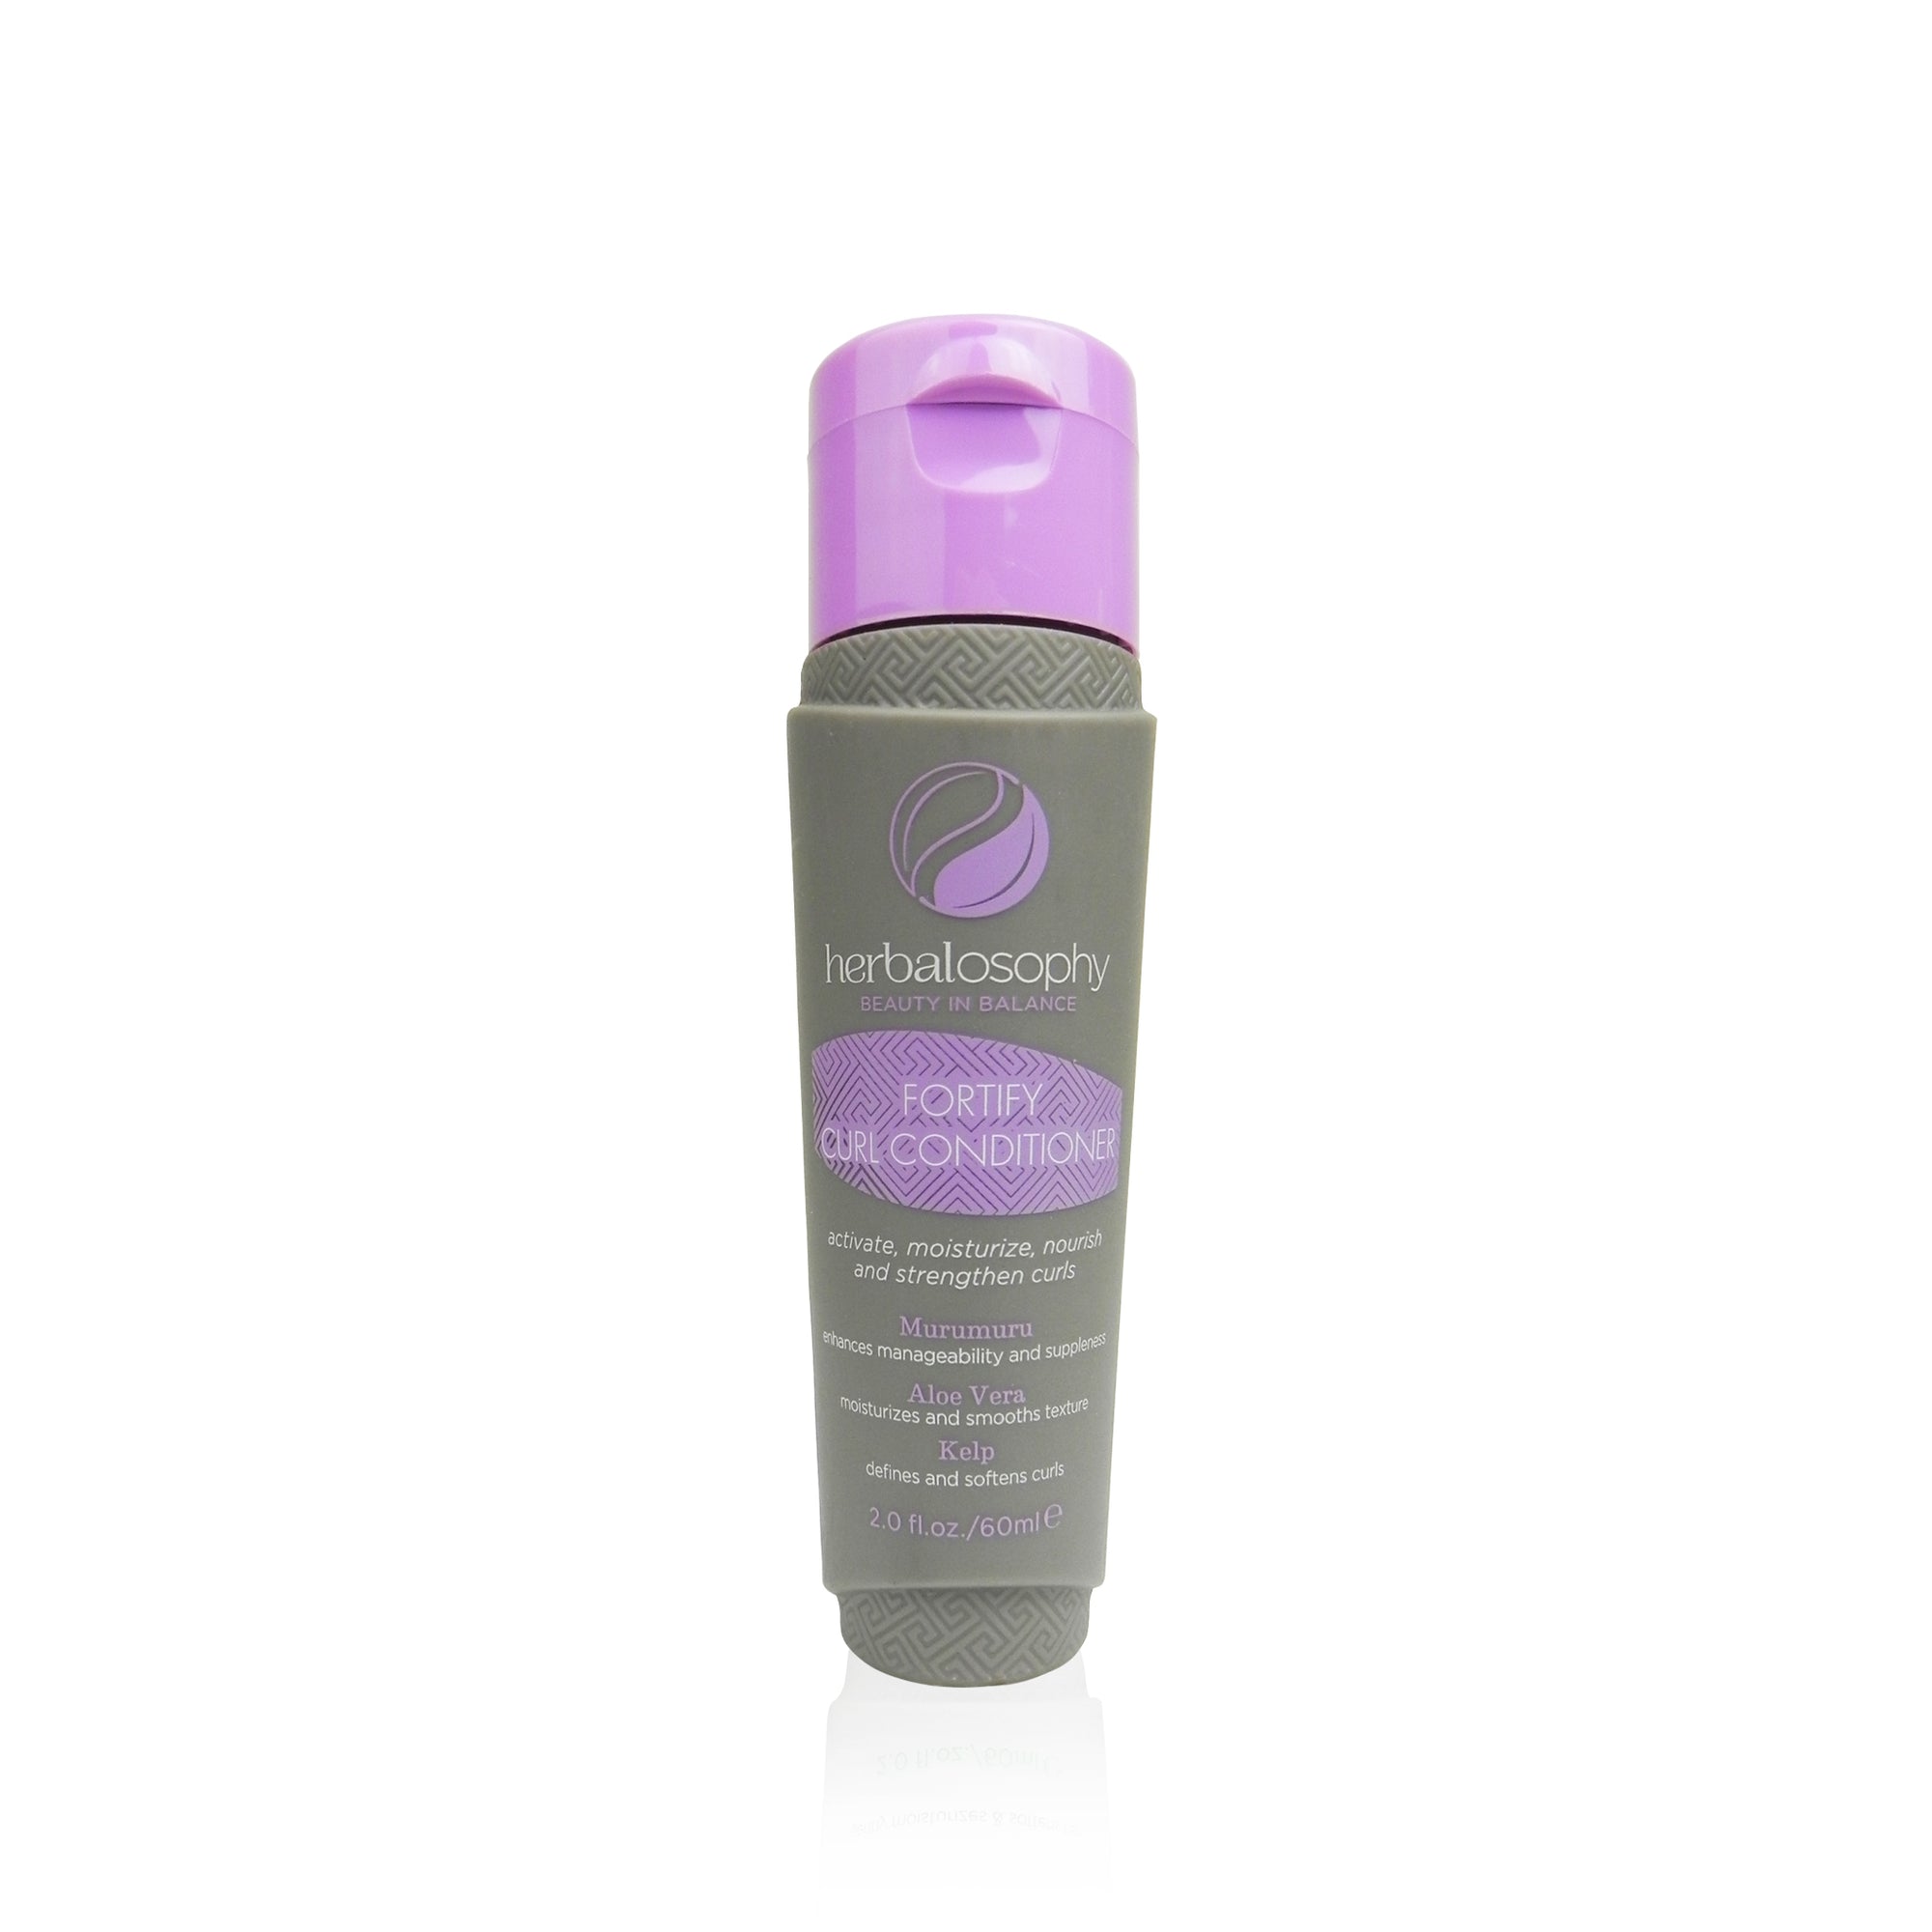 Herbalosophy Fortify Curl Conditioner bottle 2oz